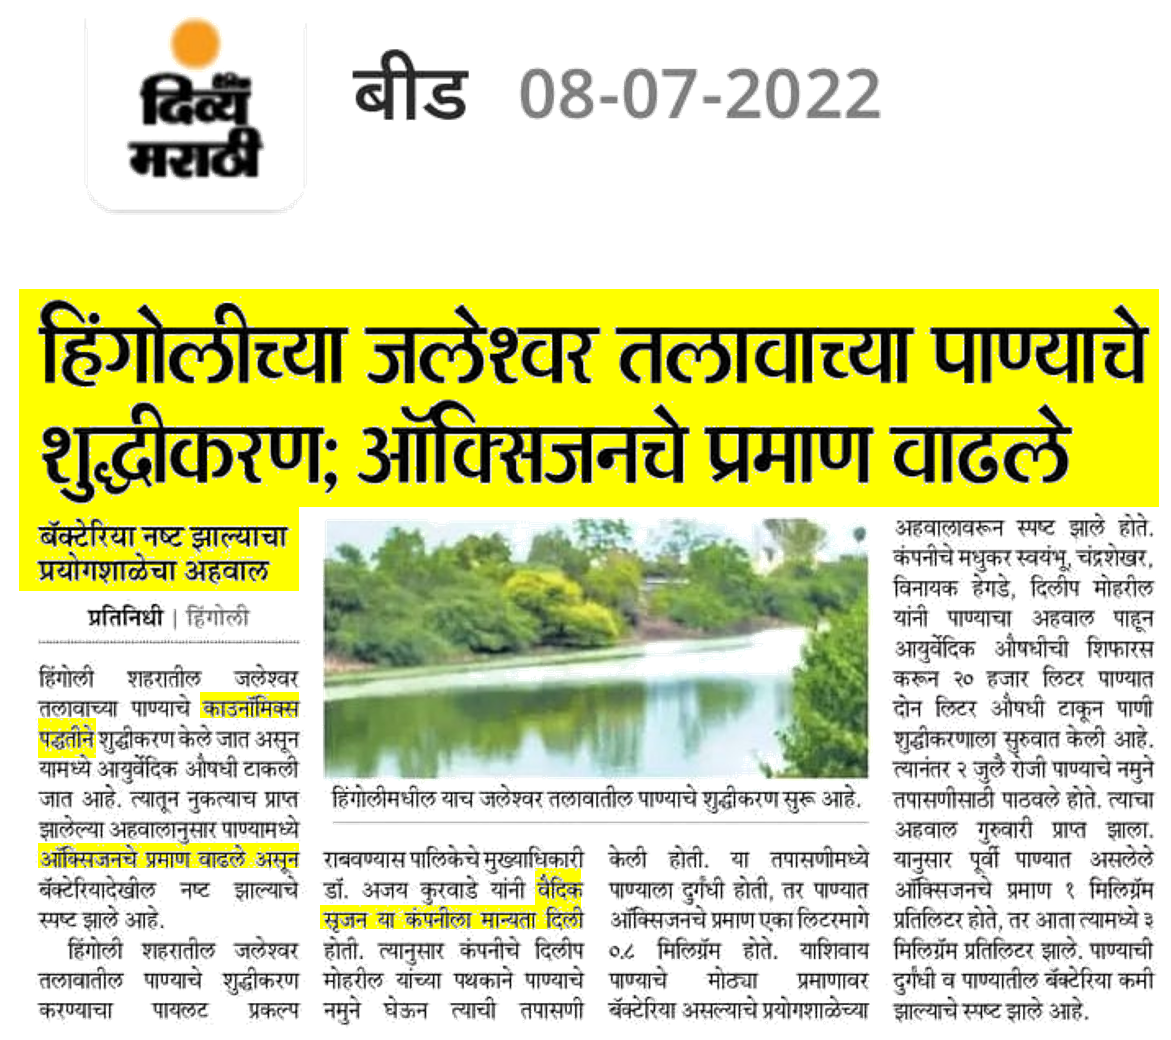 It&rsquo;s a splendid news that &ldquo;Beed&rdquo; edition of &ldquo;Dainik Divya Marathi&rdquo; has given a detailed coverage of our ongoing project in the thirty ...